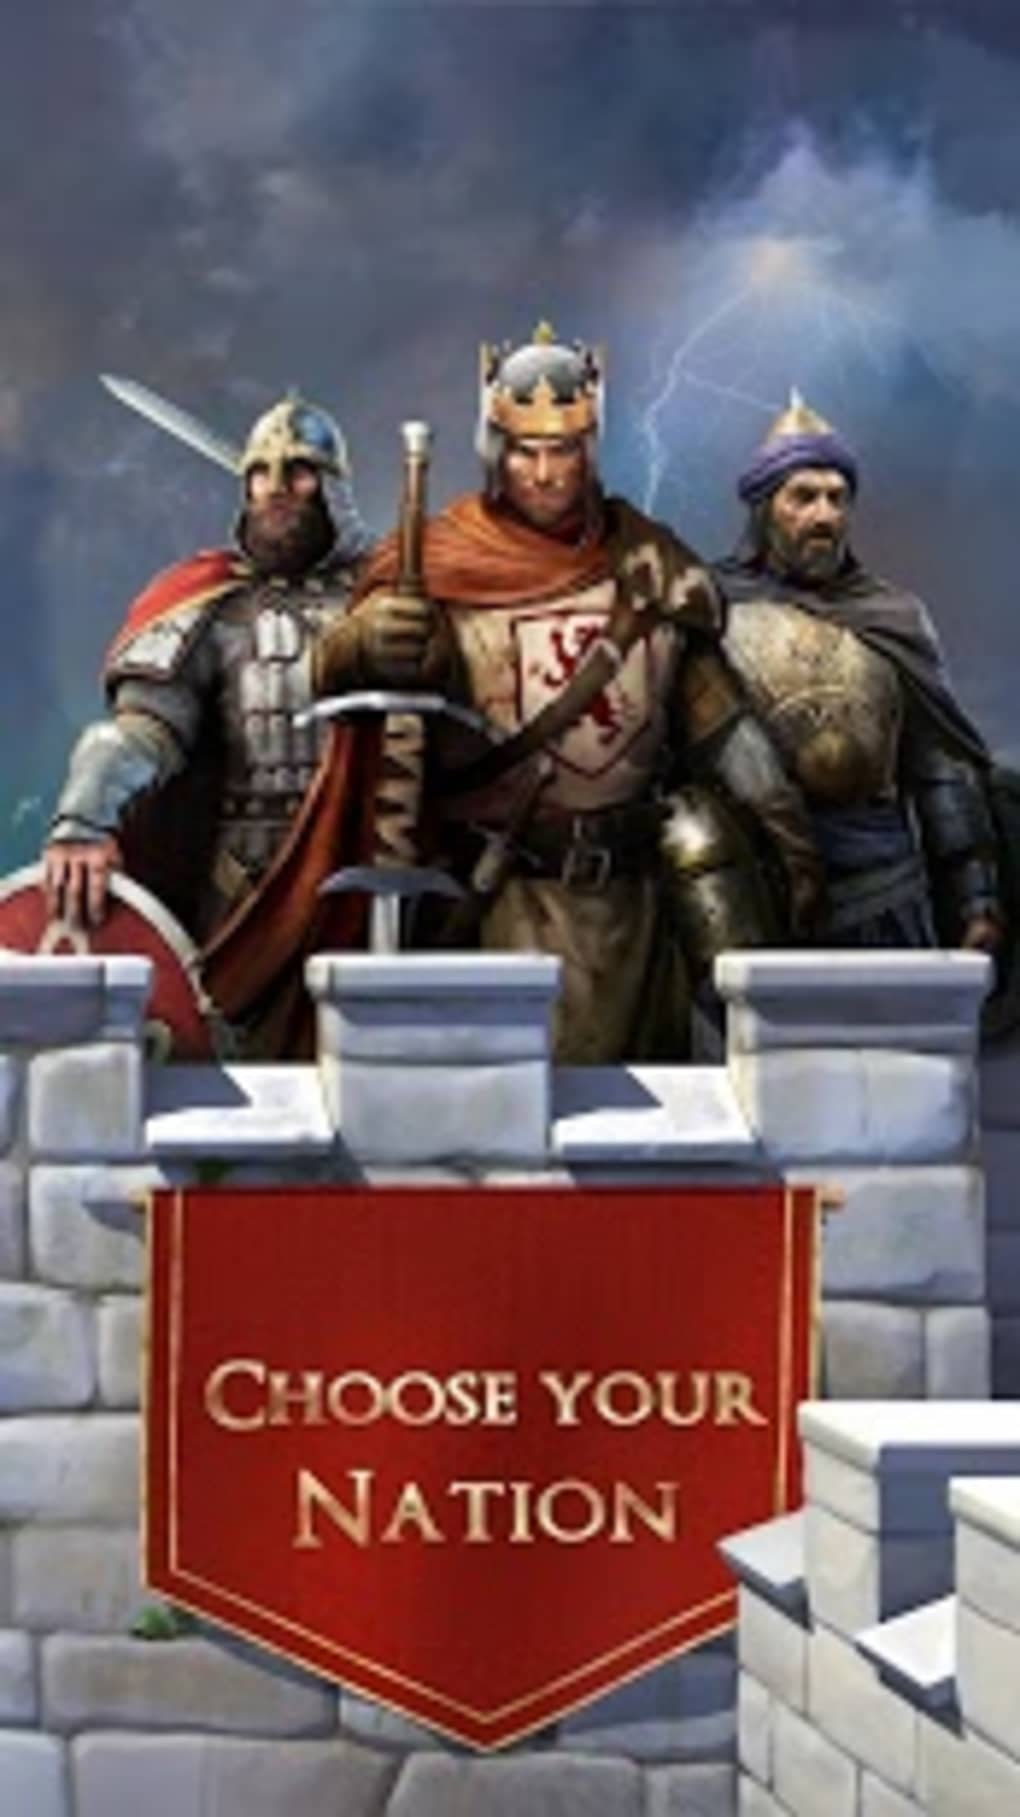 march of empires war of lords game download